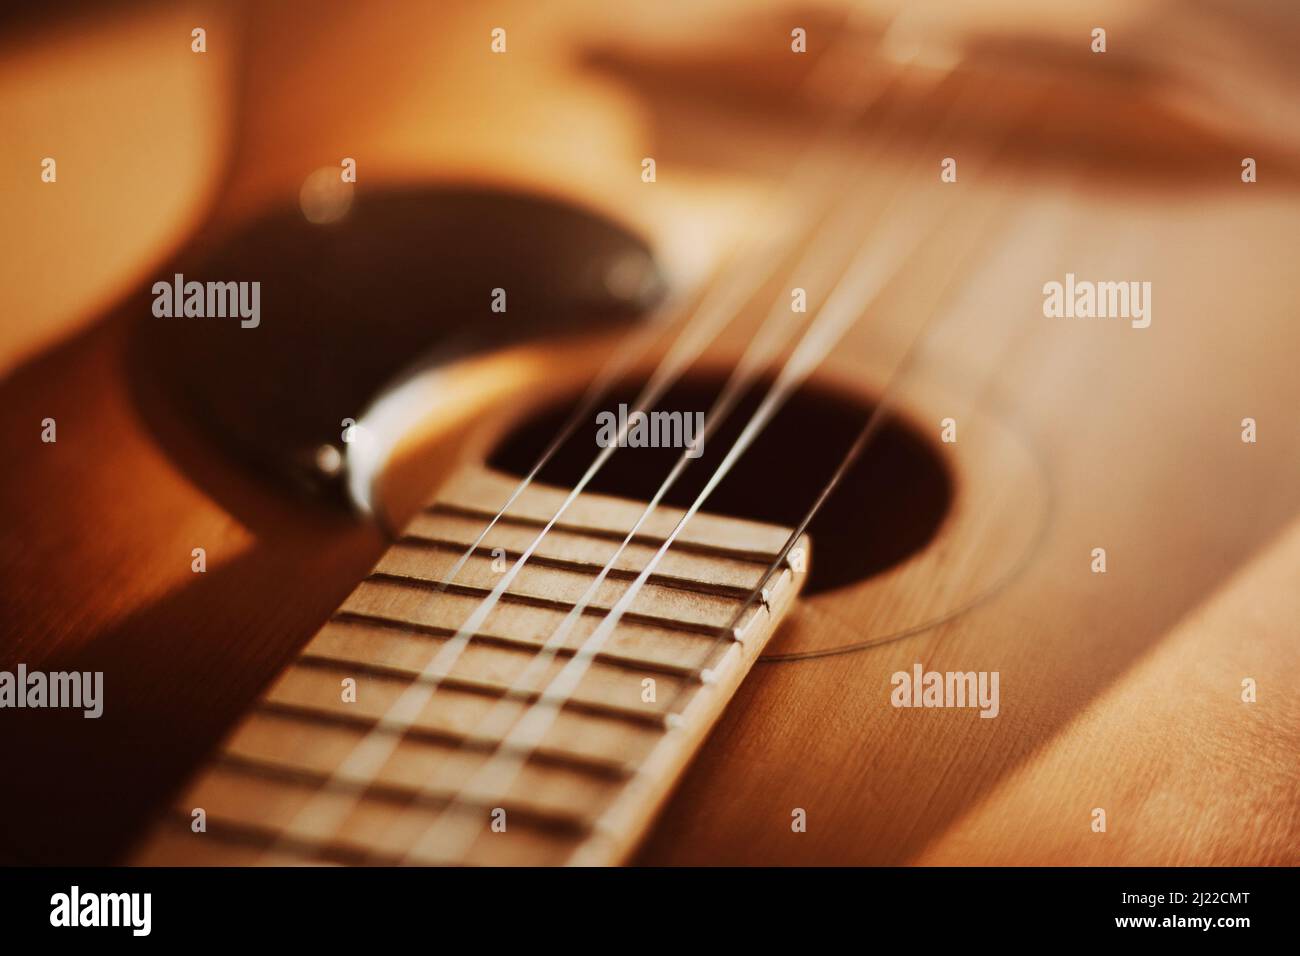 An old vintage acoustic guitar with metal strings is illuminated by sunlight. A musical instrument. Solfeggio. Stock Photo